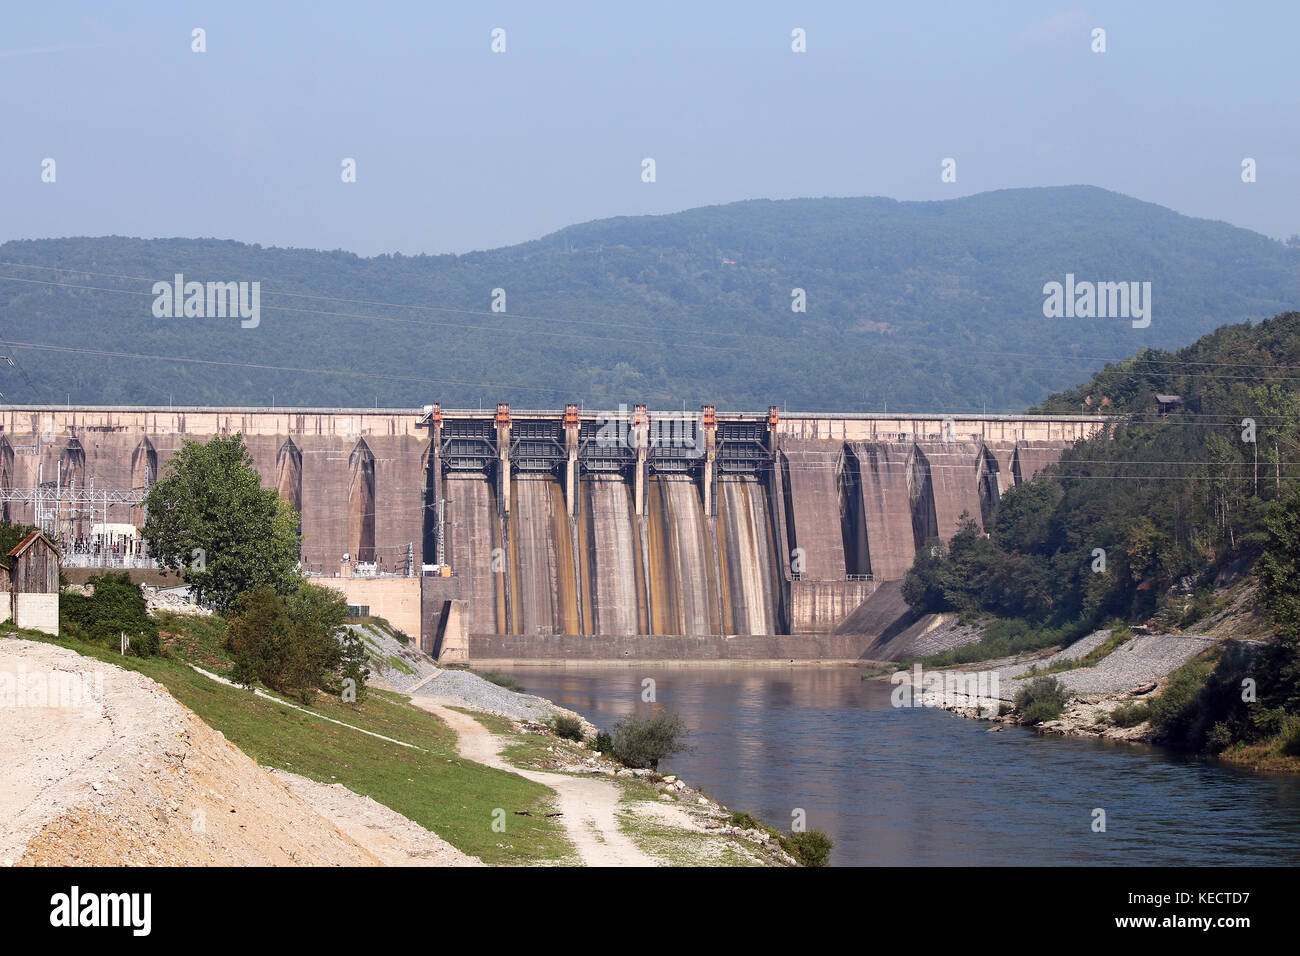 hydroelectric power plants on river industry zone Stock Photo